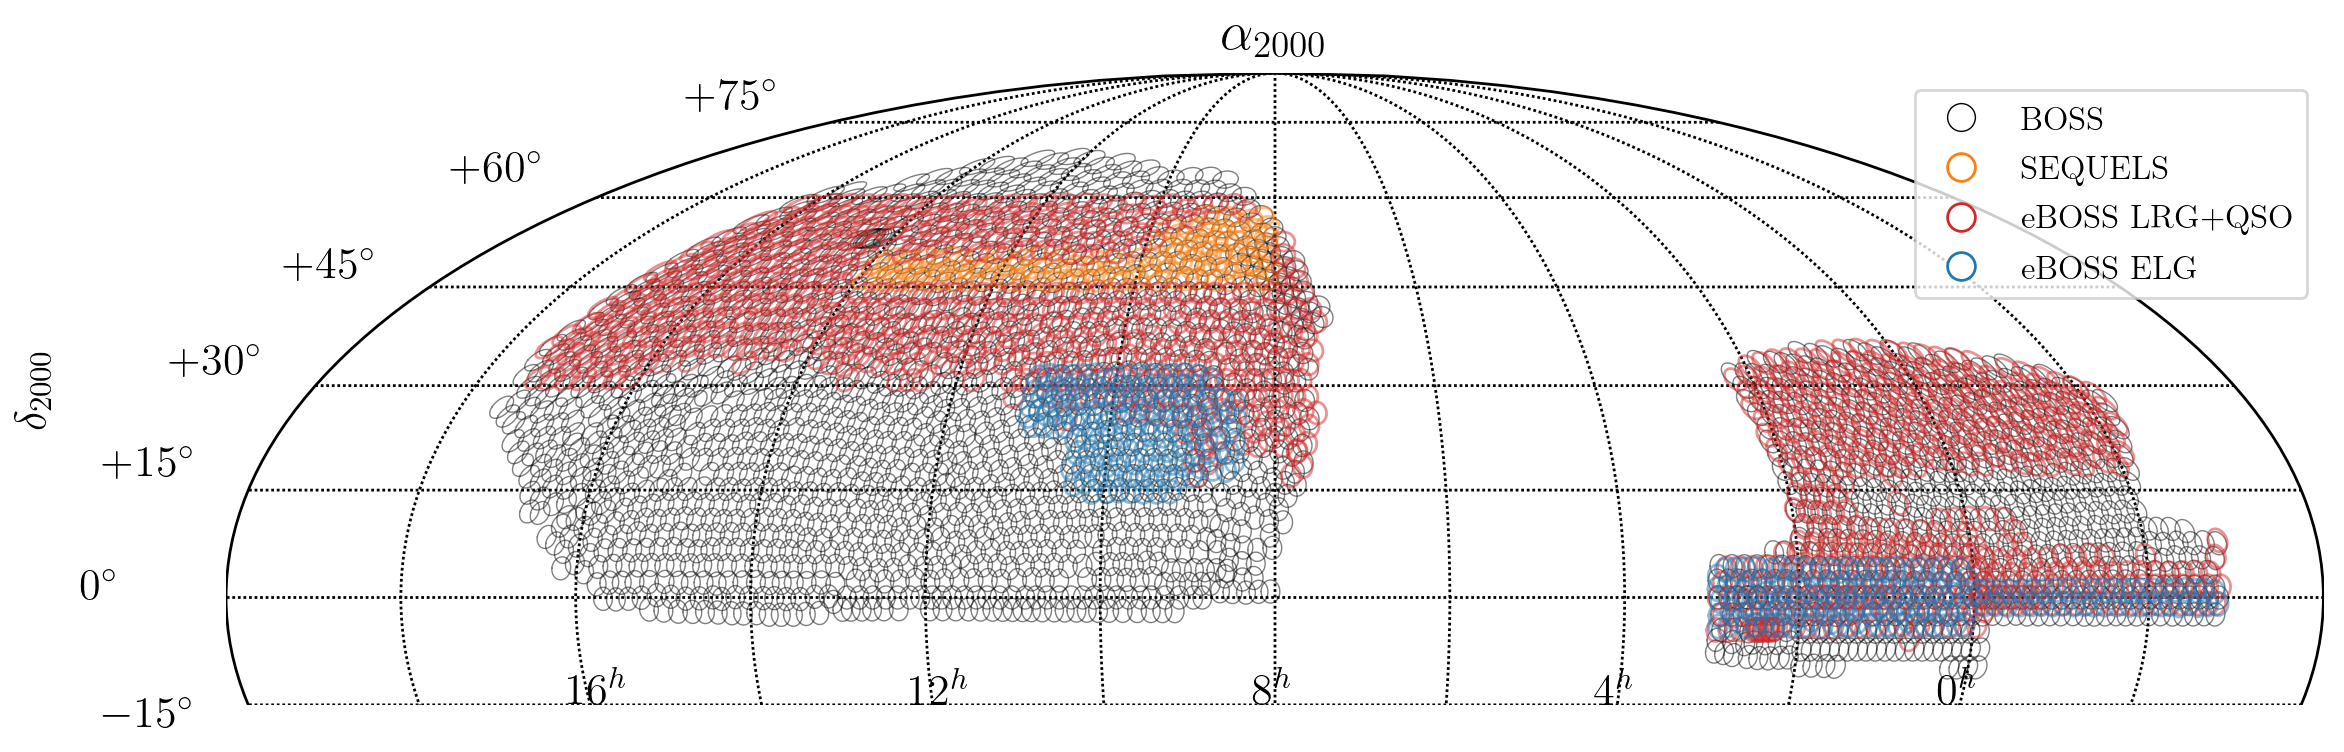 DR16 eBOSS spectroscopic coverage in Equatorial coordinates (plot centered at RA = 8h.) 